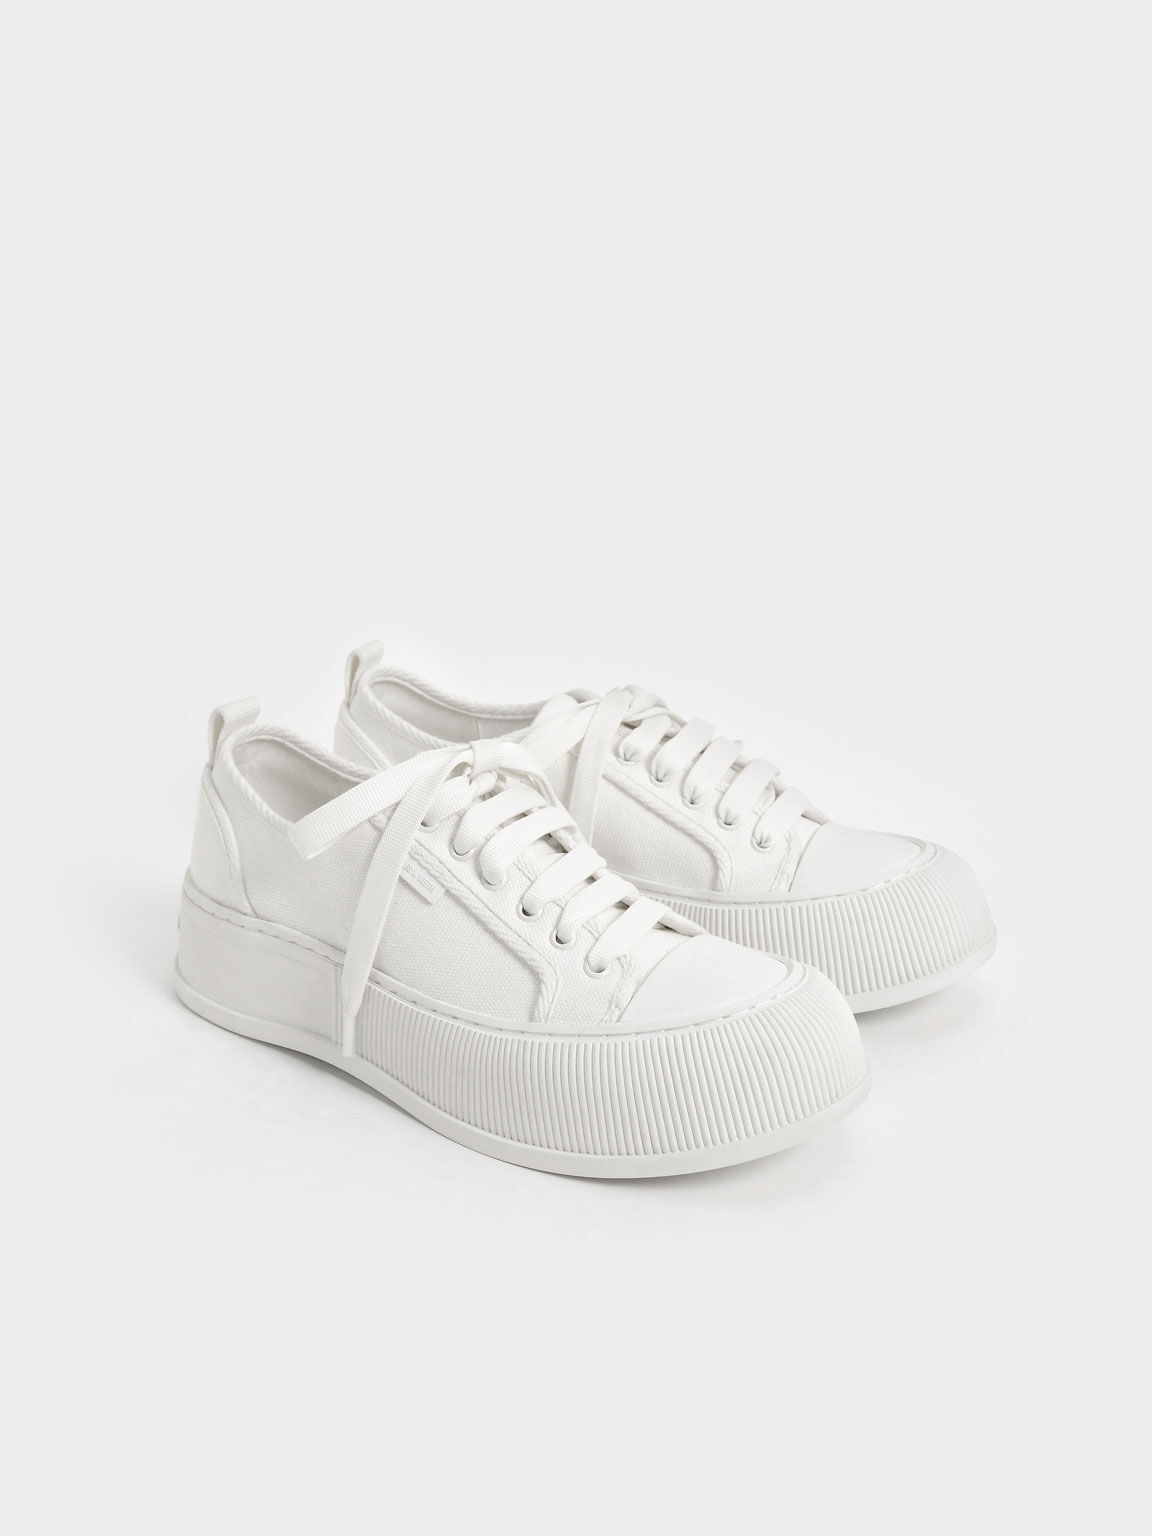 Organic Cotton Low-Top Sneakers, White, hi-res